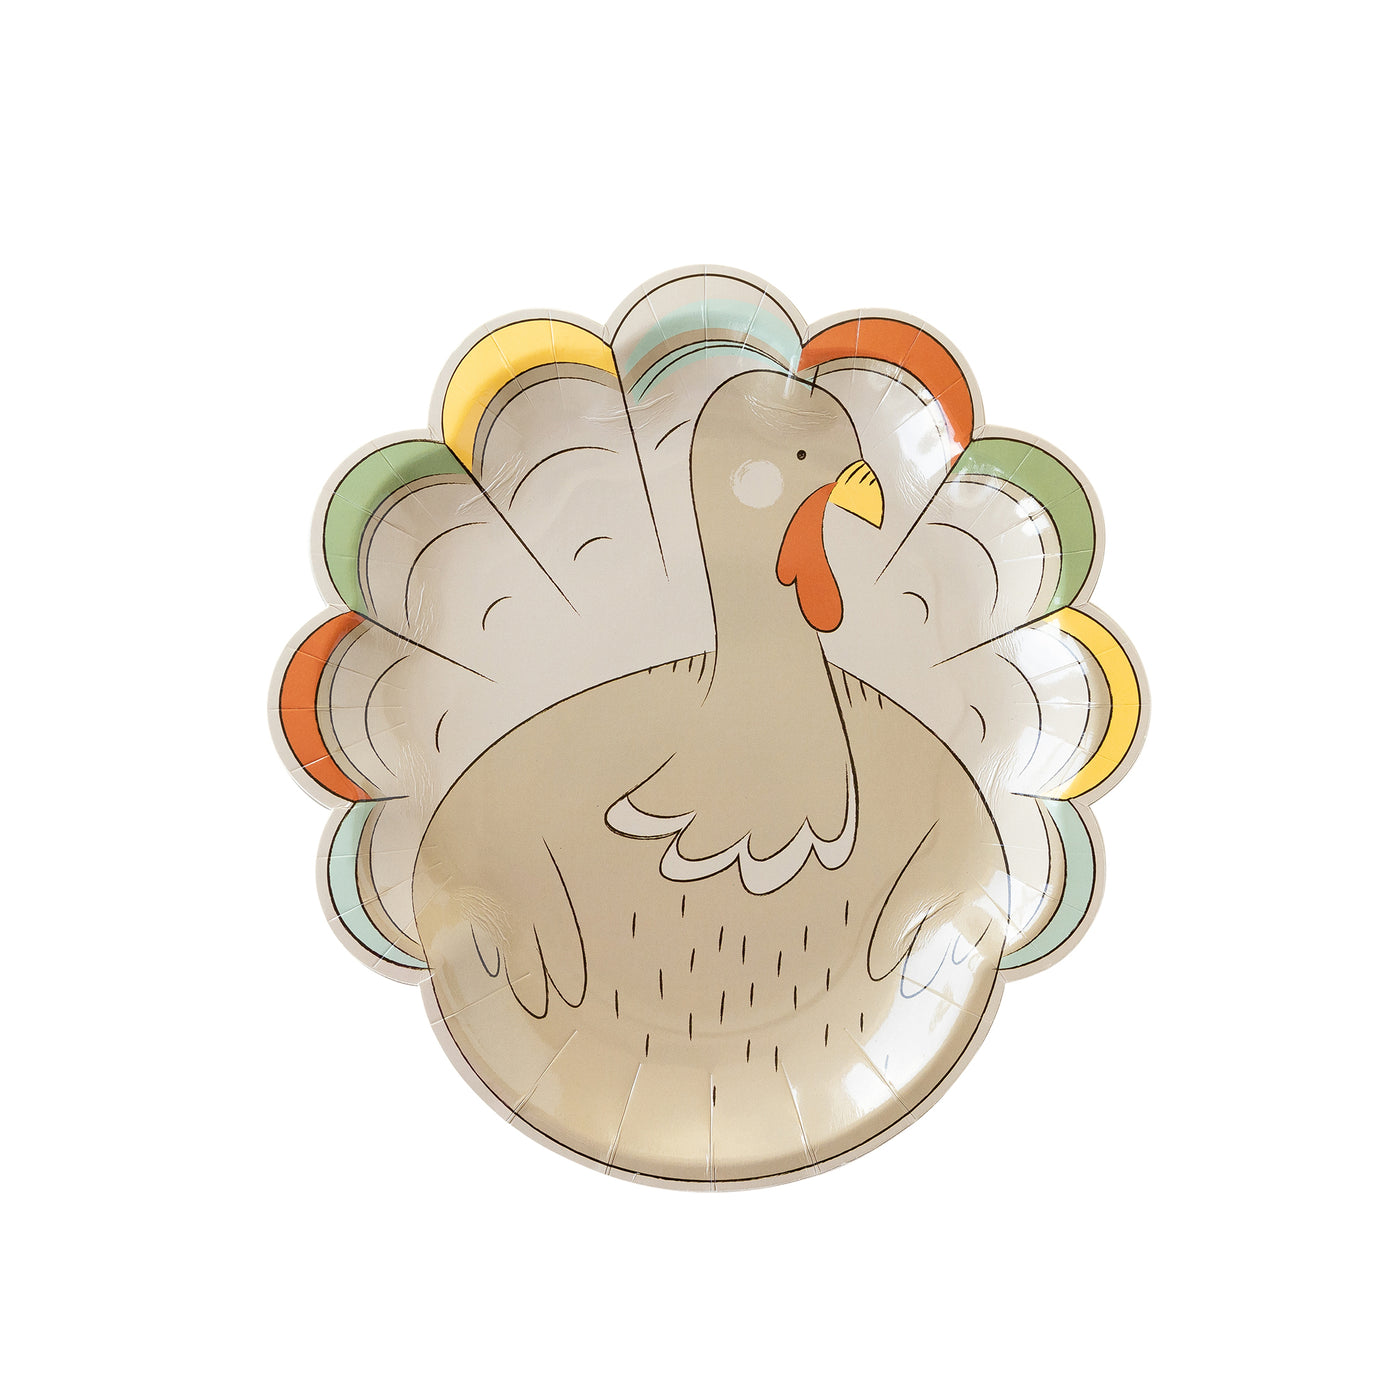 THP1040 - Occasions By Shakira - Harvest Turkey Shaped Paper Plate